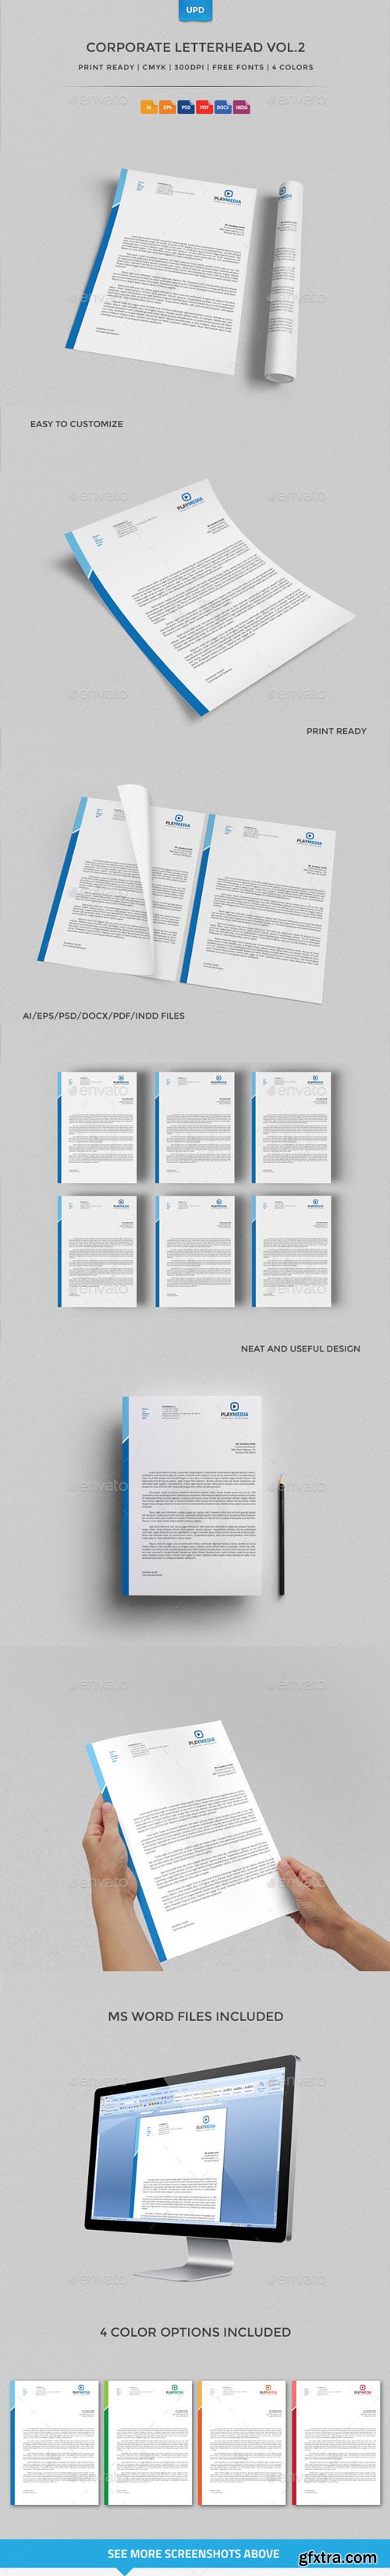 GraphicRiver - Corporate Letterhead Vol.2 with MS Word Doc - 6651984